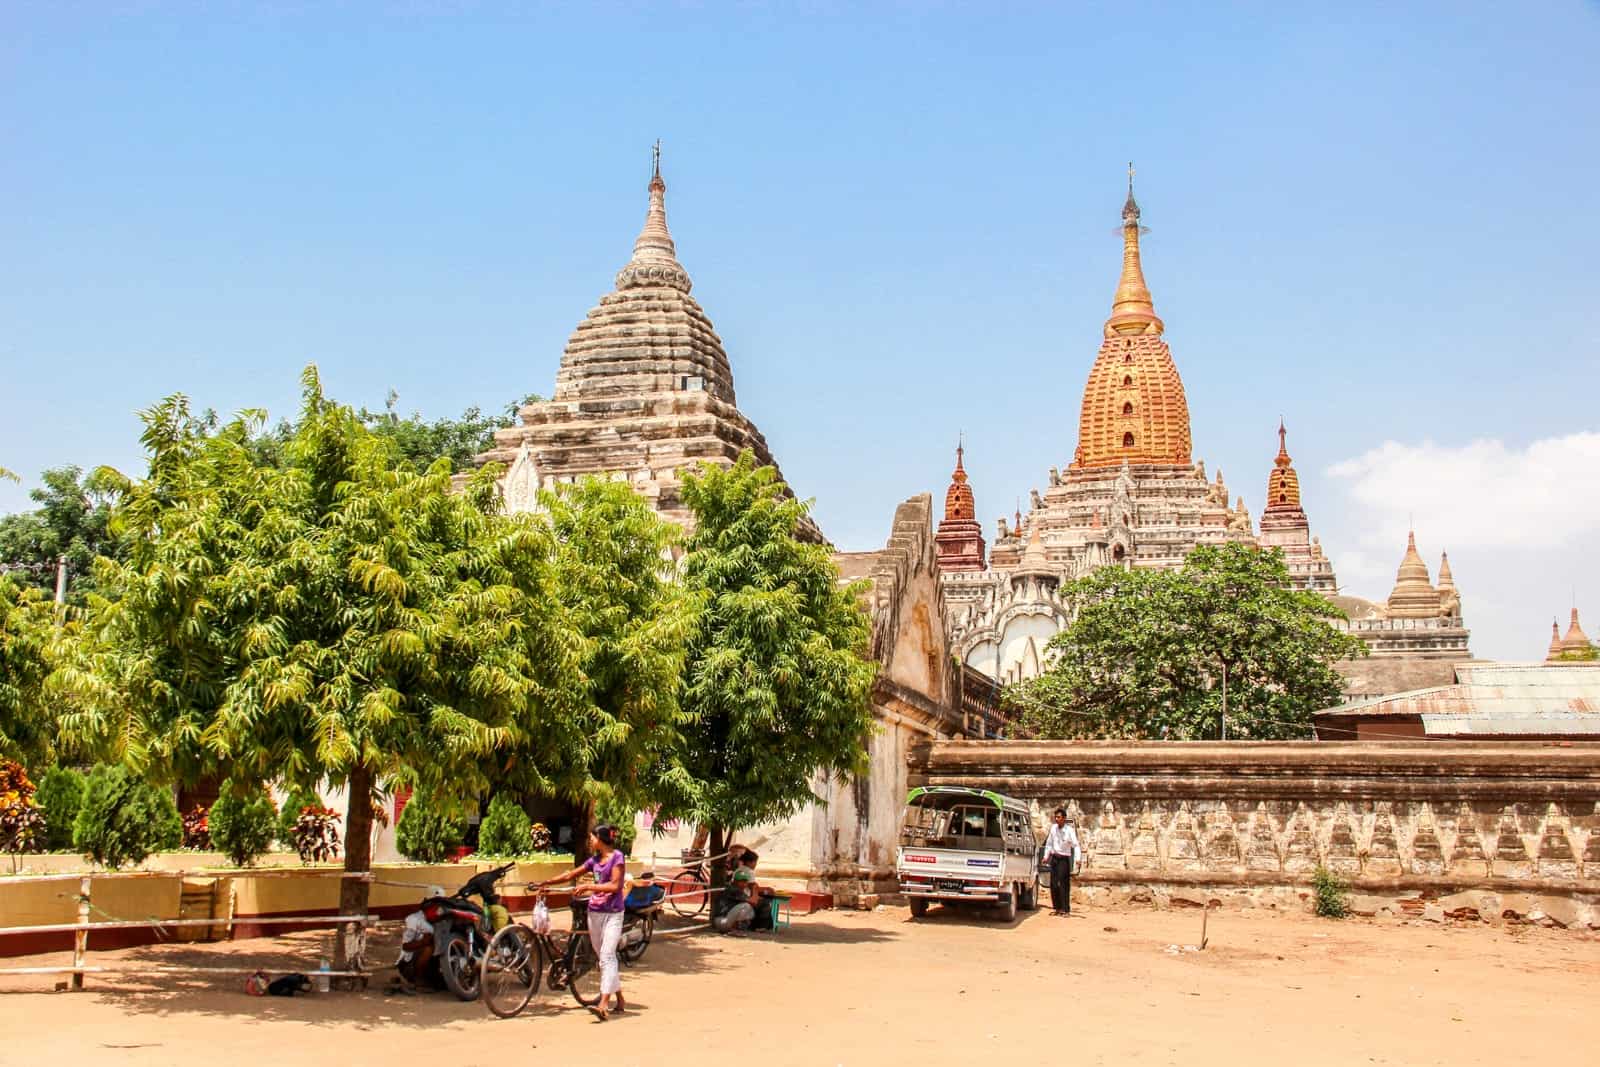 A woman in a pink t-shirt and white trousers pushes a bike in front of a tree at the entrance to a large temple complex with white and gold pagodas, in the dusty orange grounds of Bagan, Myanmar